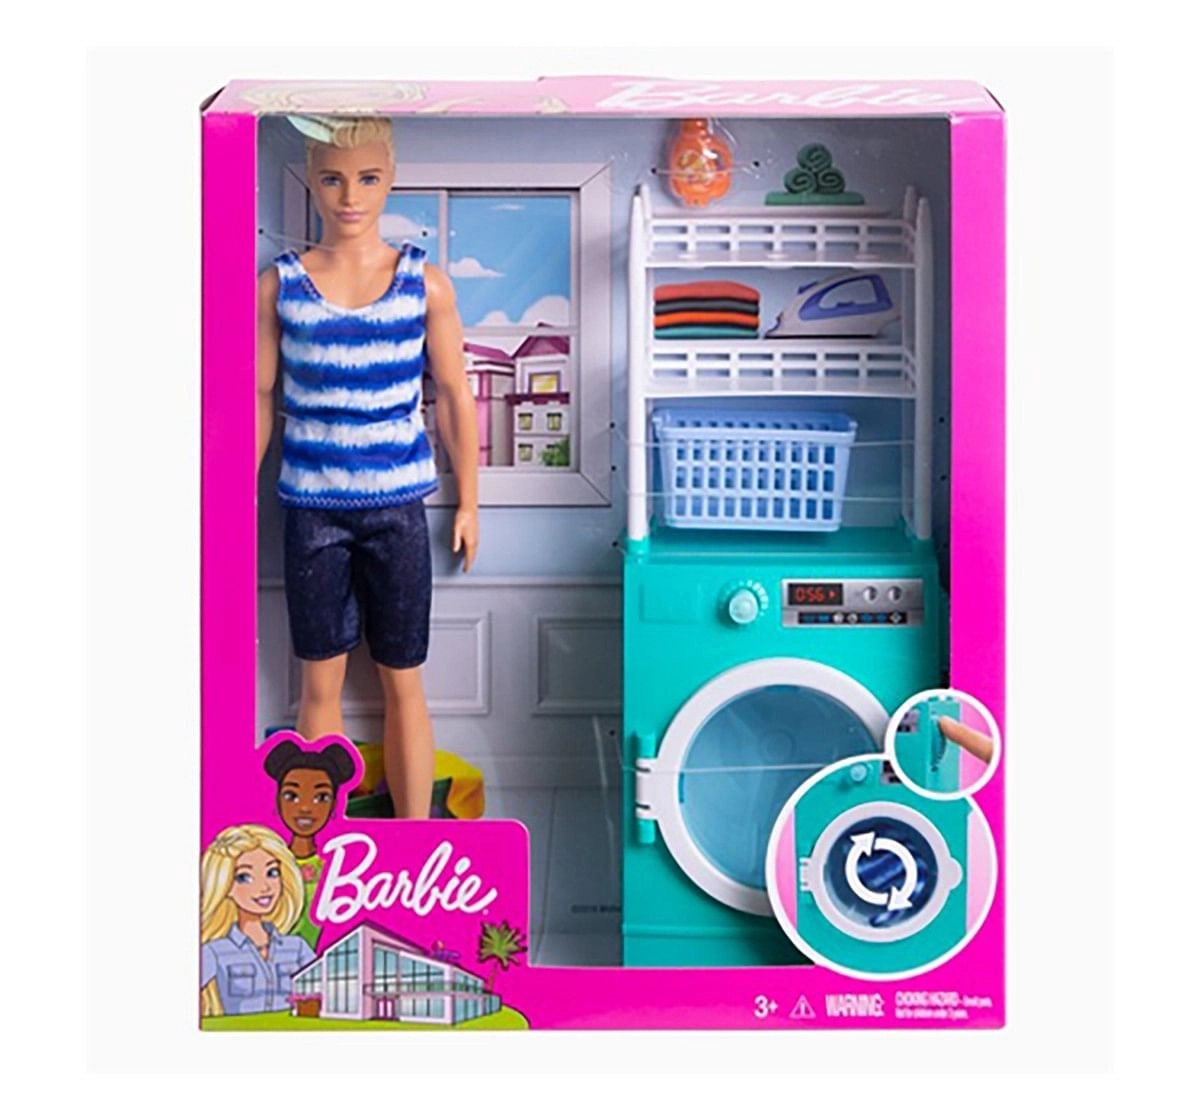 Barbie Ken/Accessory  Dolls & Accessories for Girls age 3Y+, Assorted